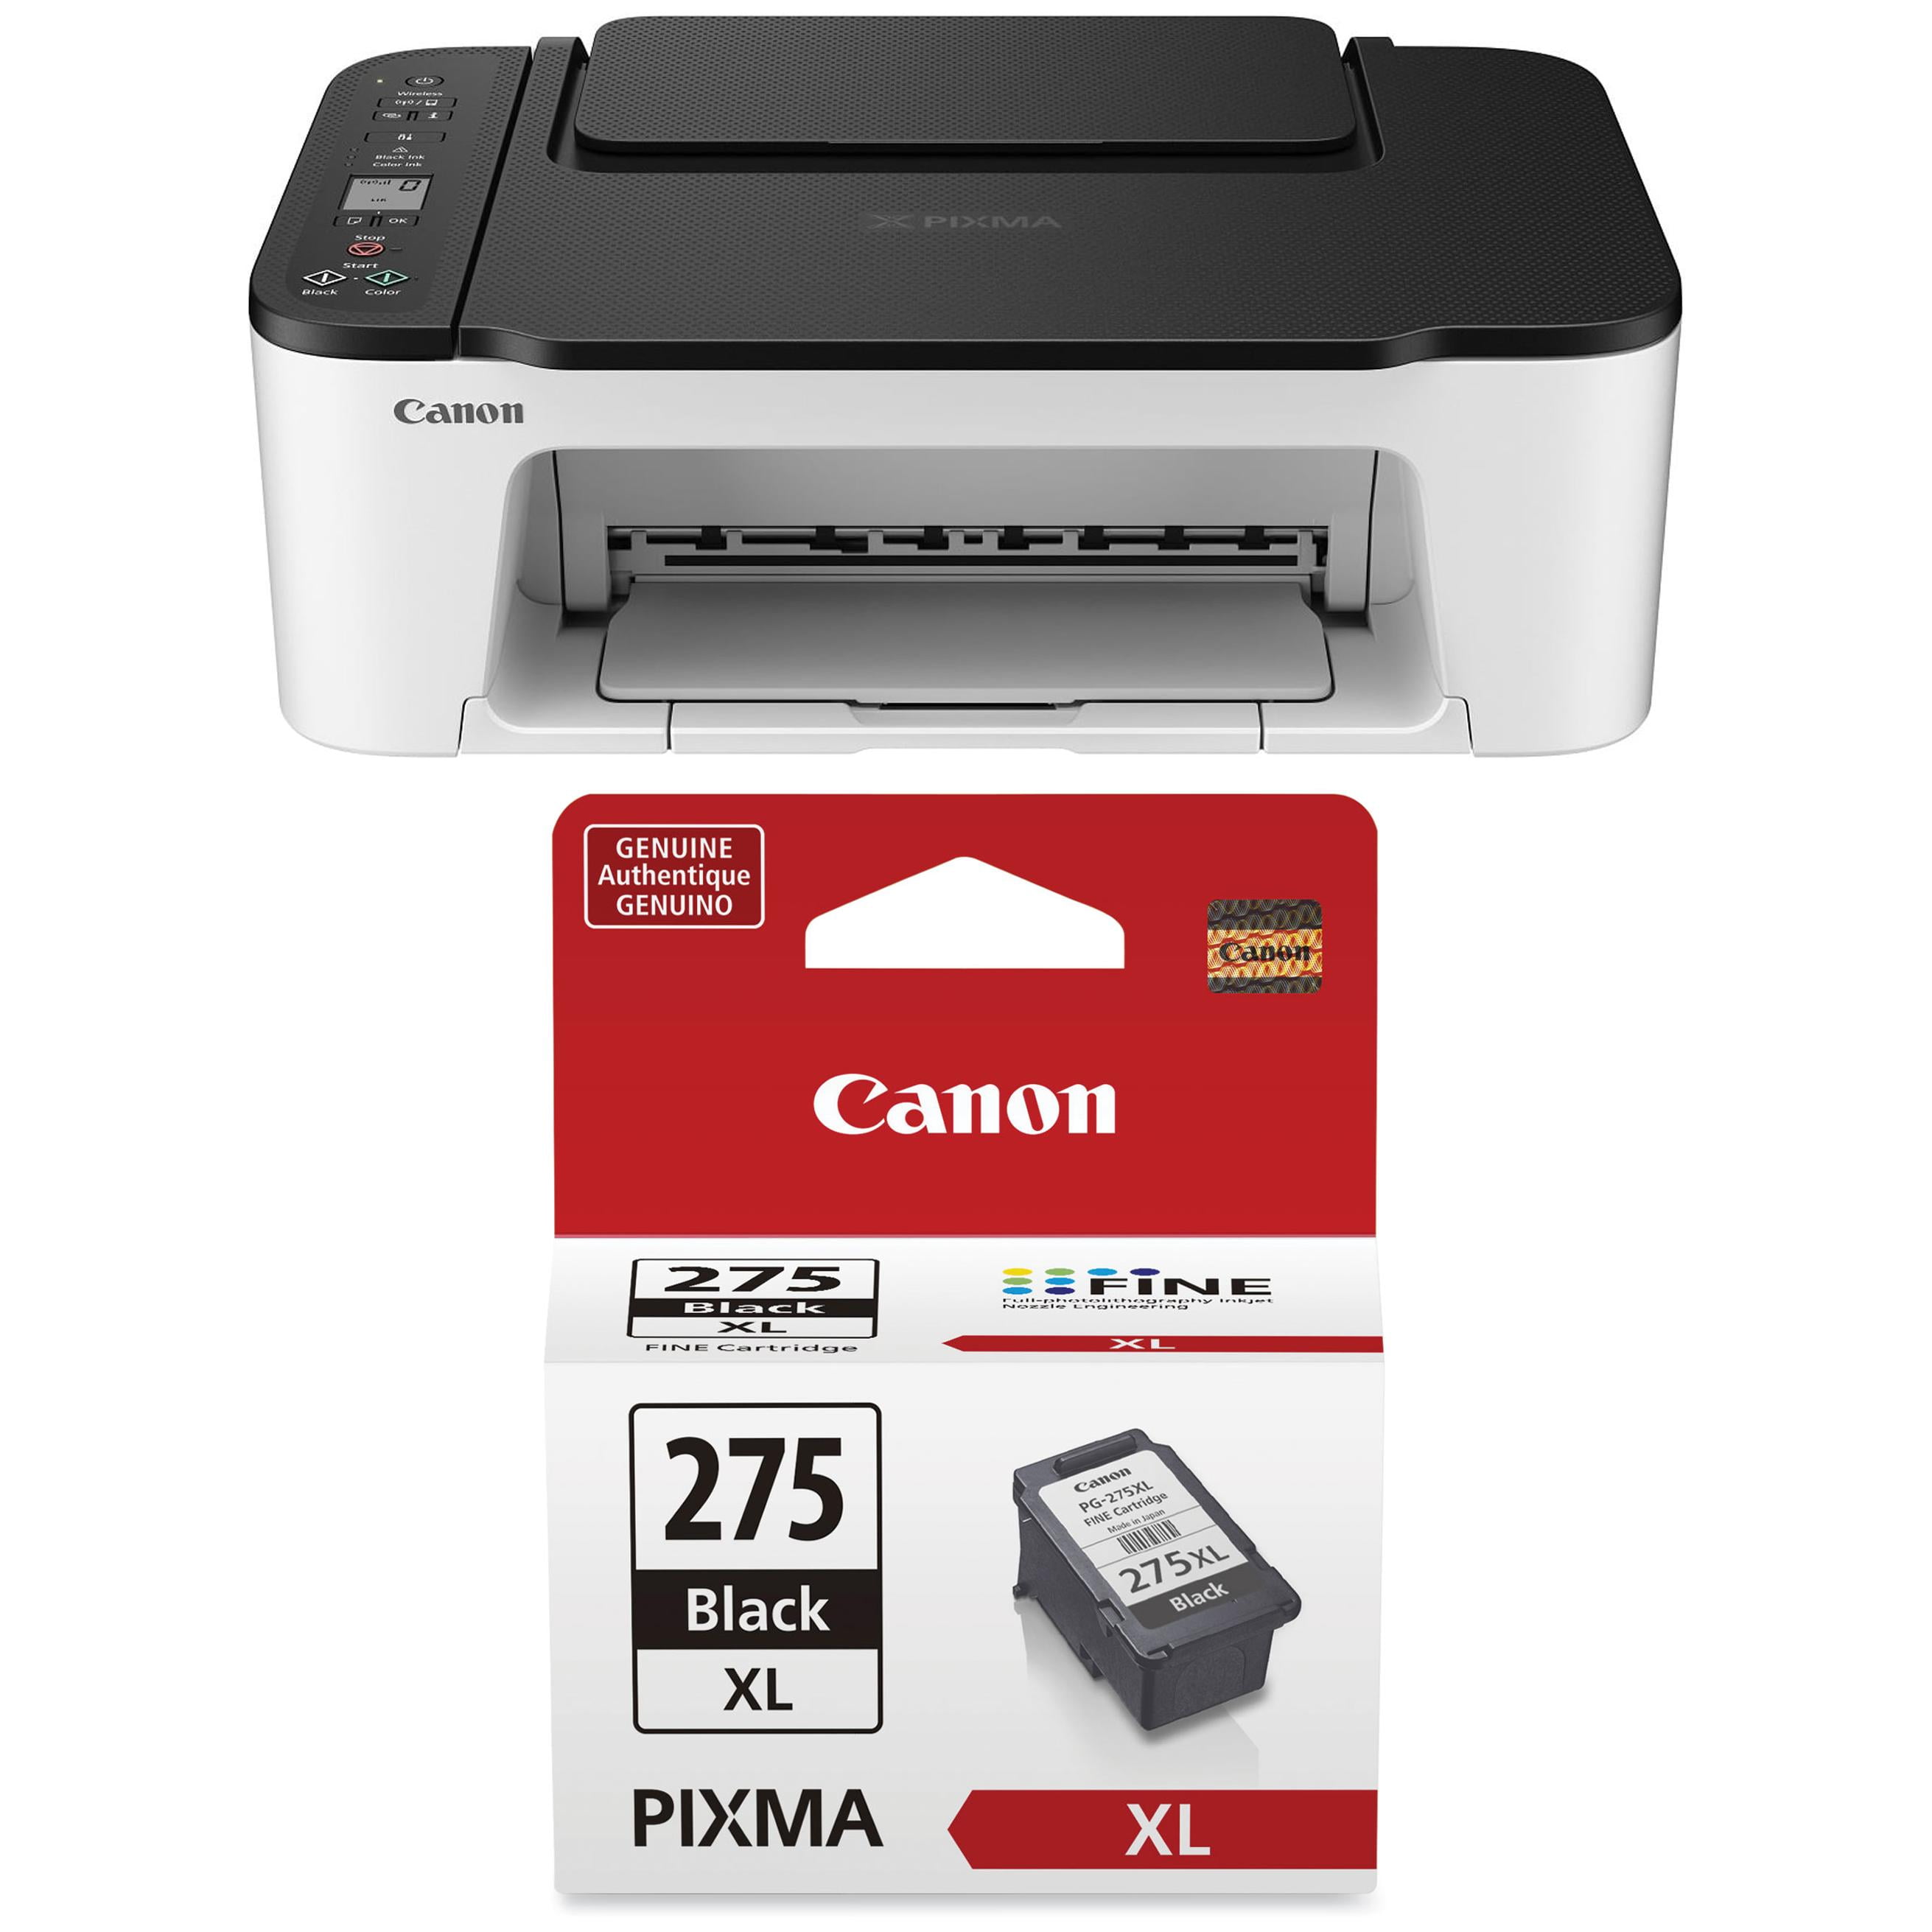 Canon PIXMA TS3522 All-In-One Wireless InkJet Printer and Canon  PG-275/CL-276 Ink Cartridge Multi Pack